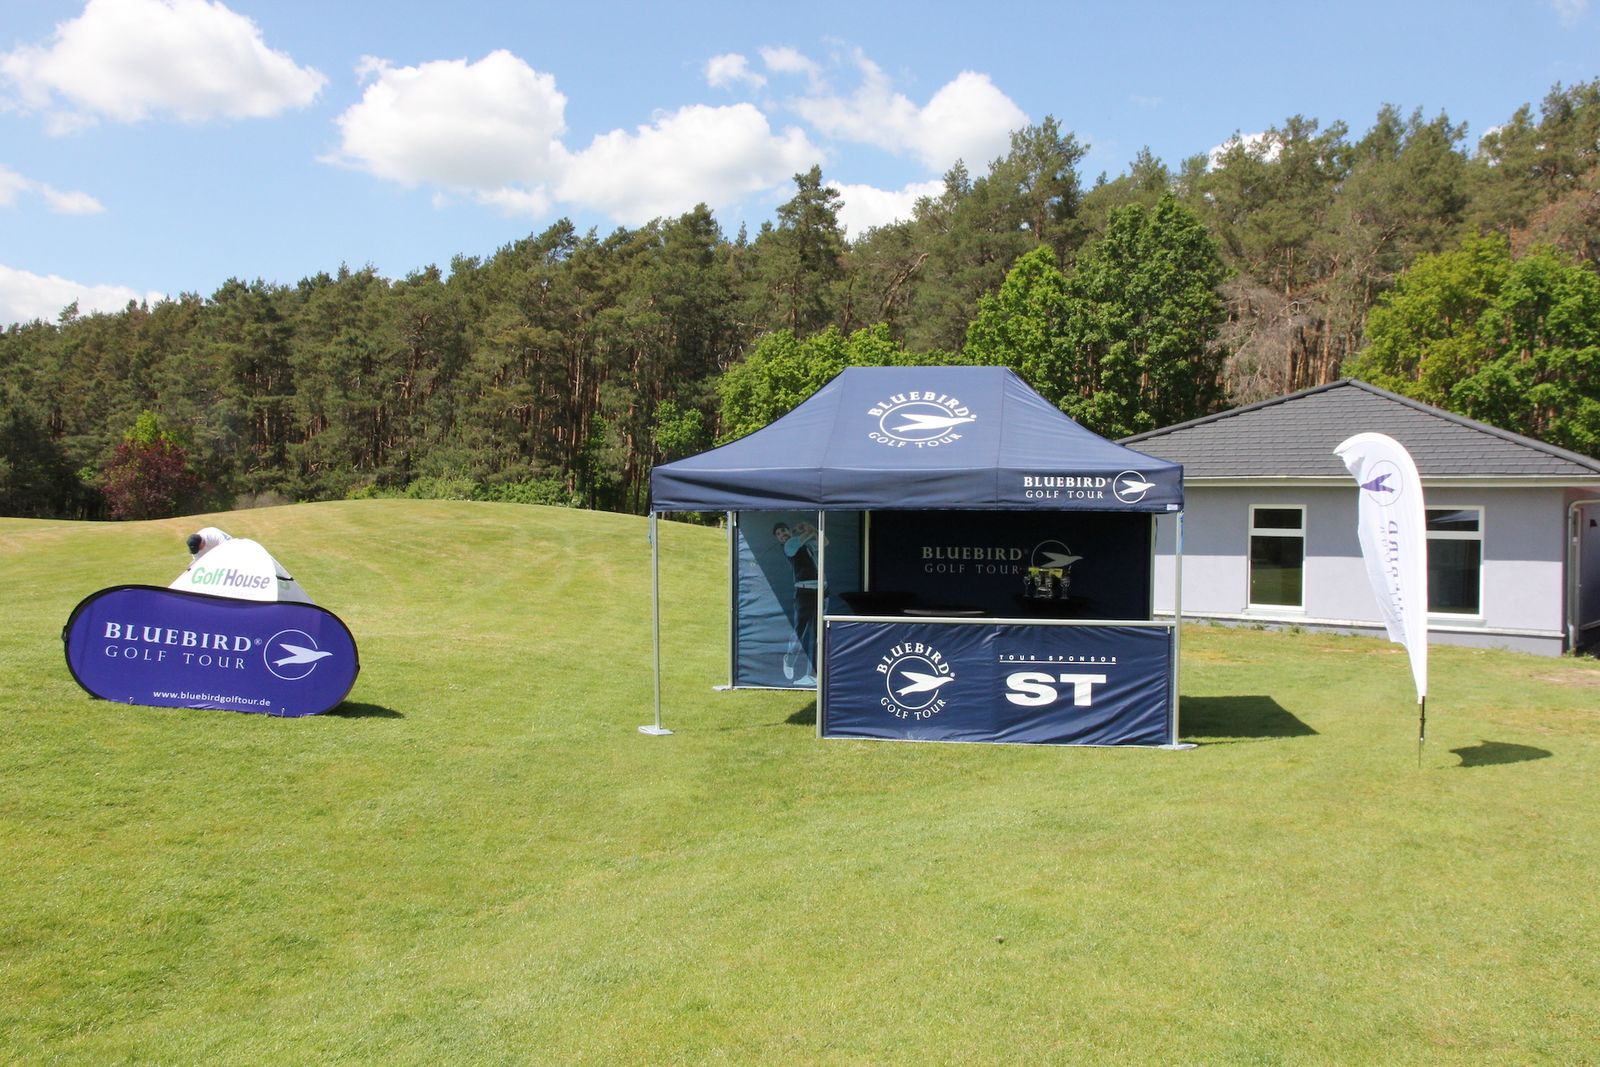 The blue Pro-Tent 5000 from FairwaySports is a meeting place for golfers after the game.